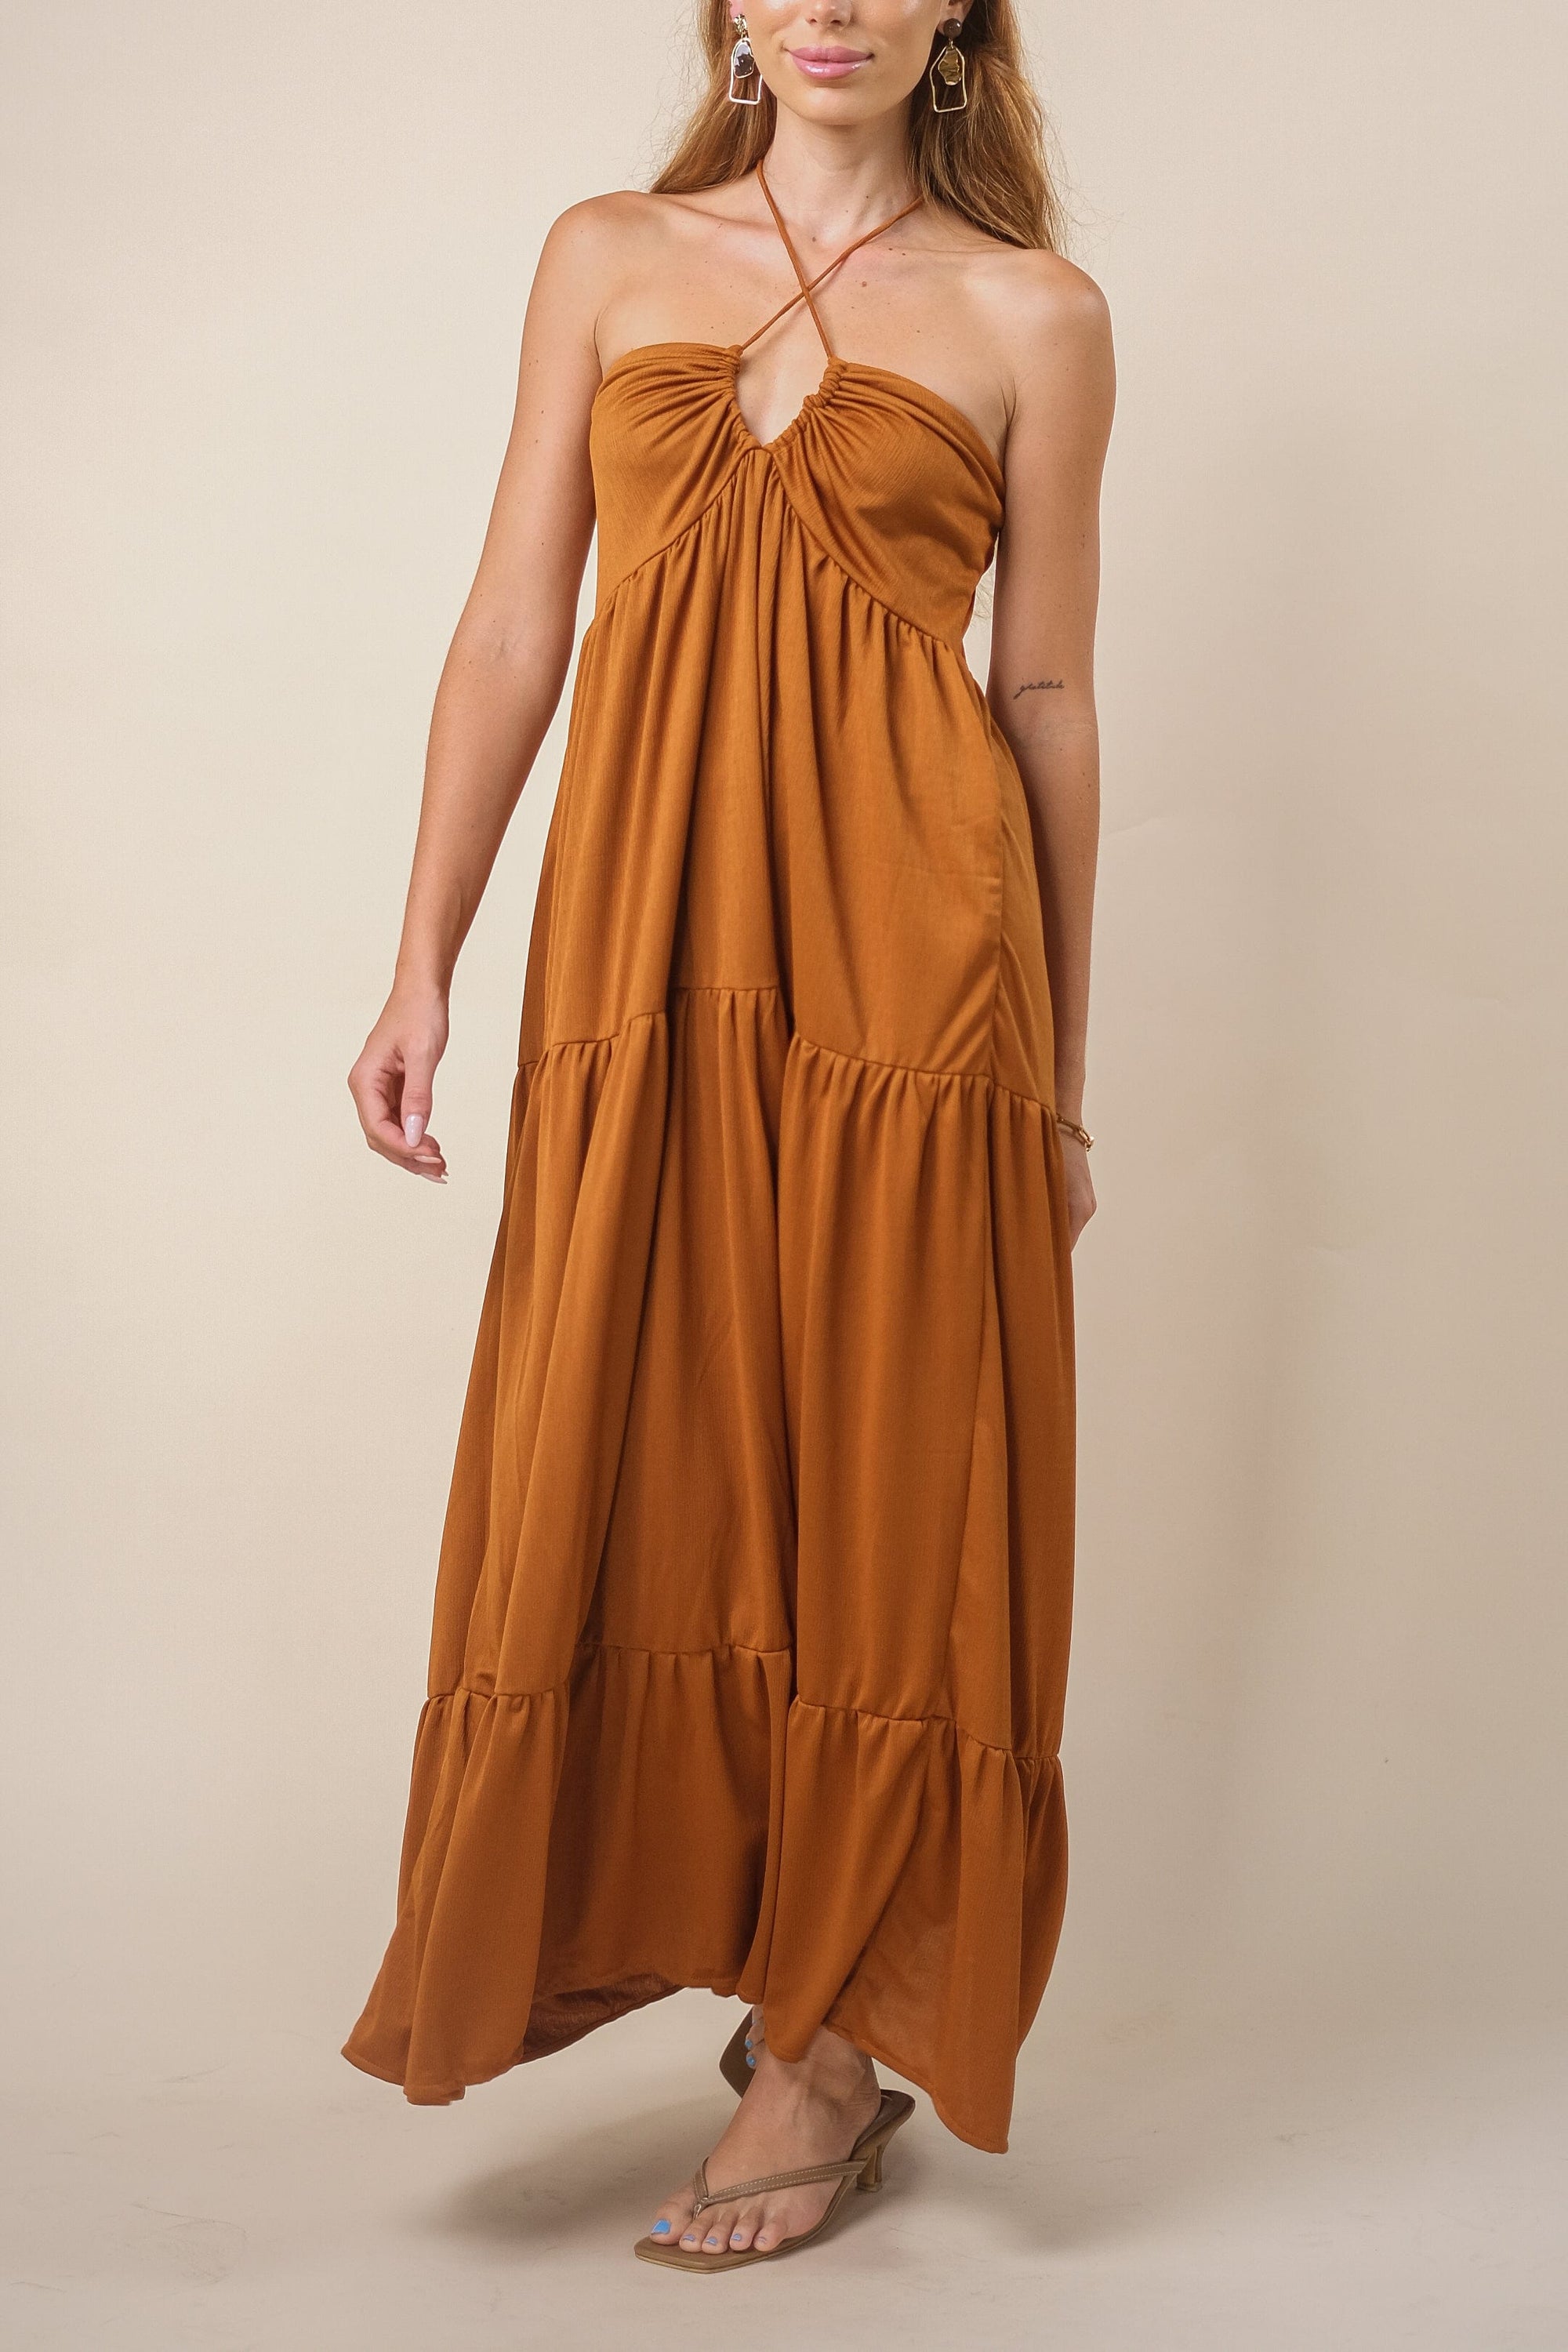 Rere Dress - Dress - LOST IN PARADISE